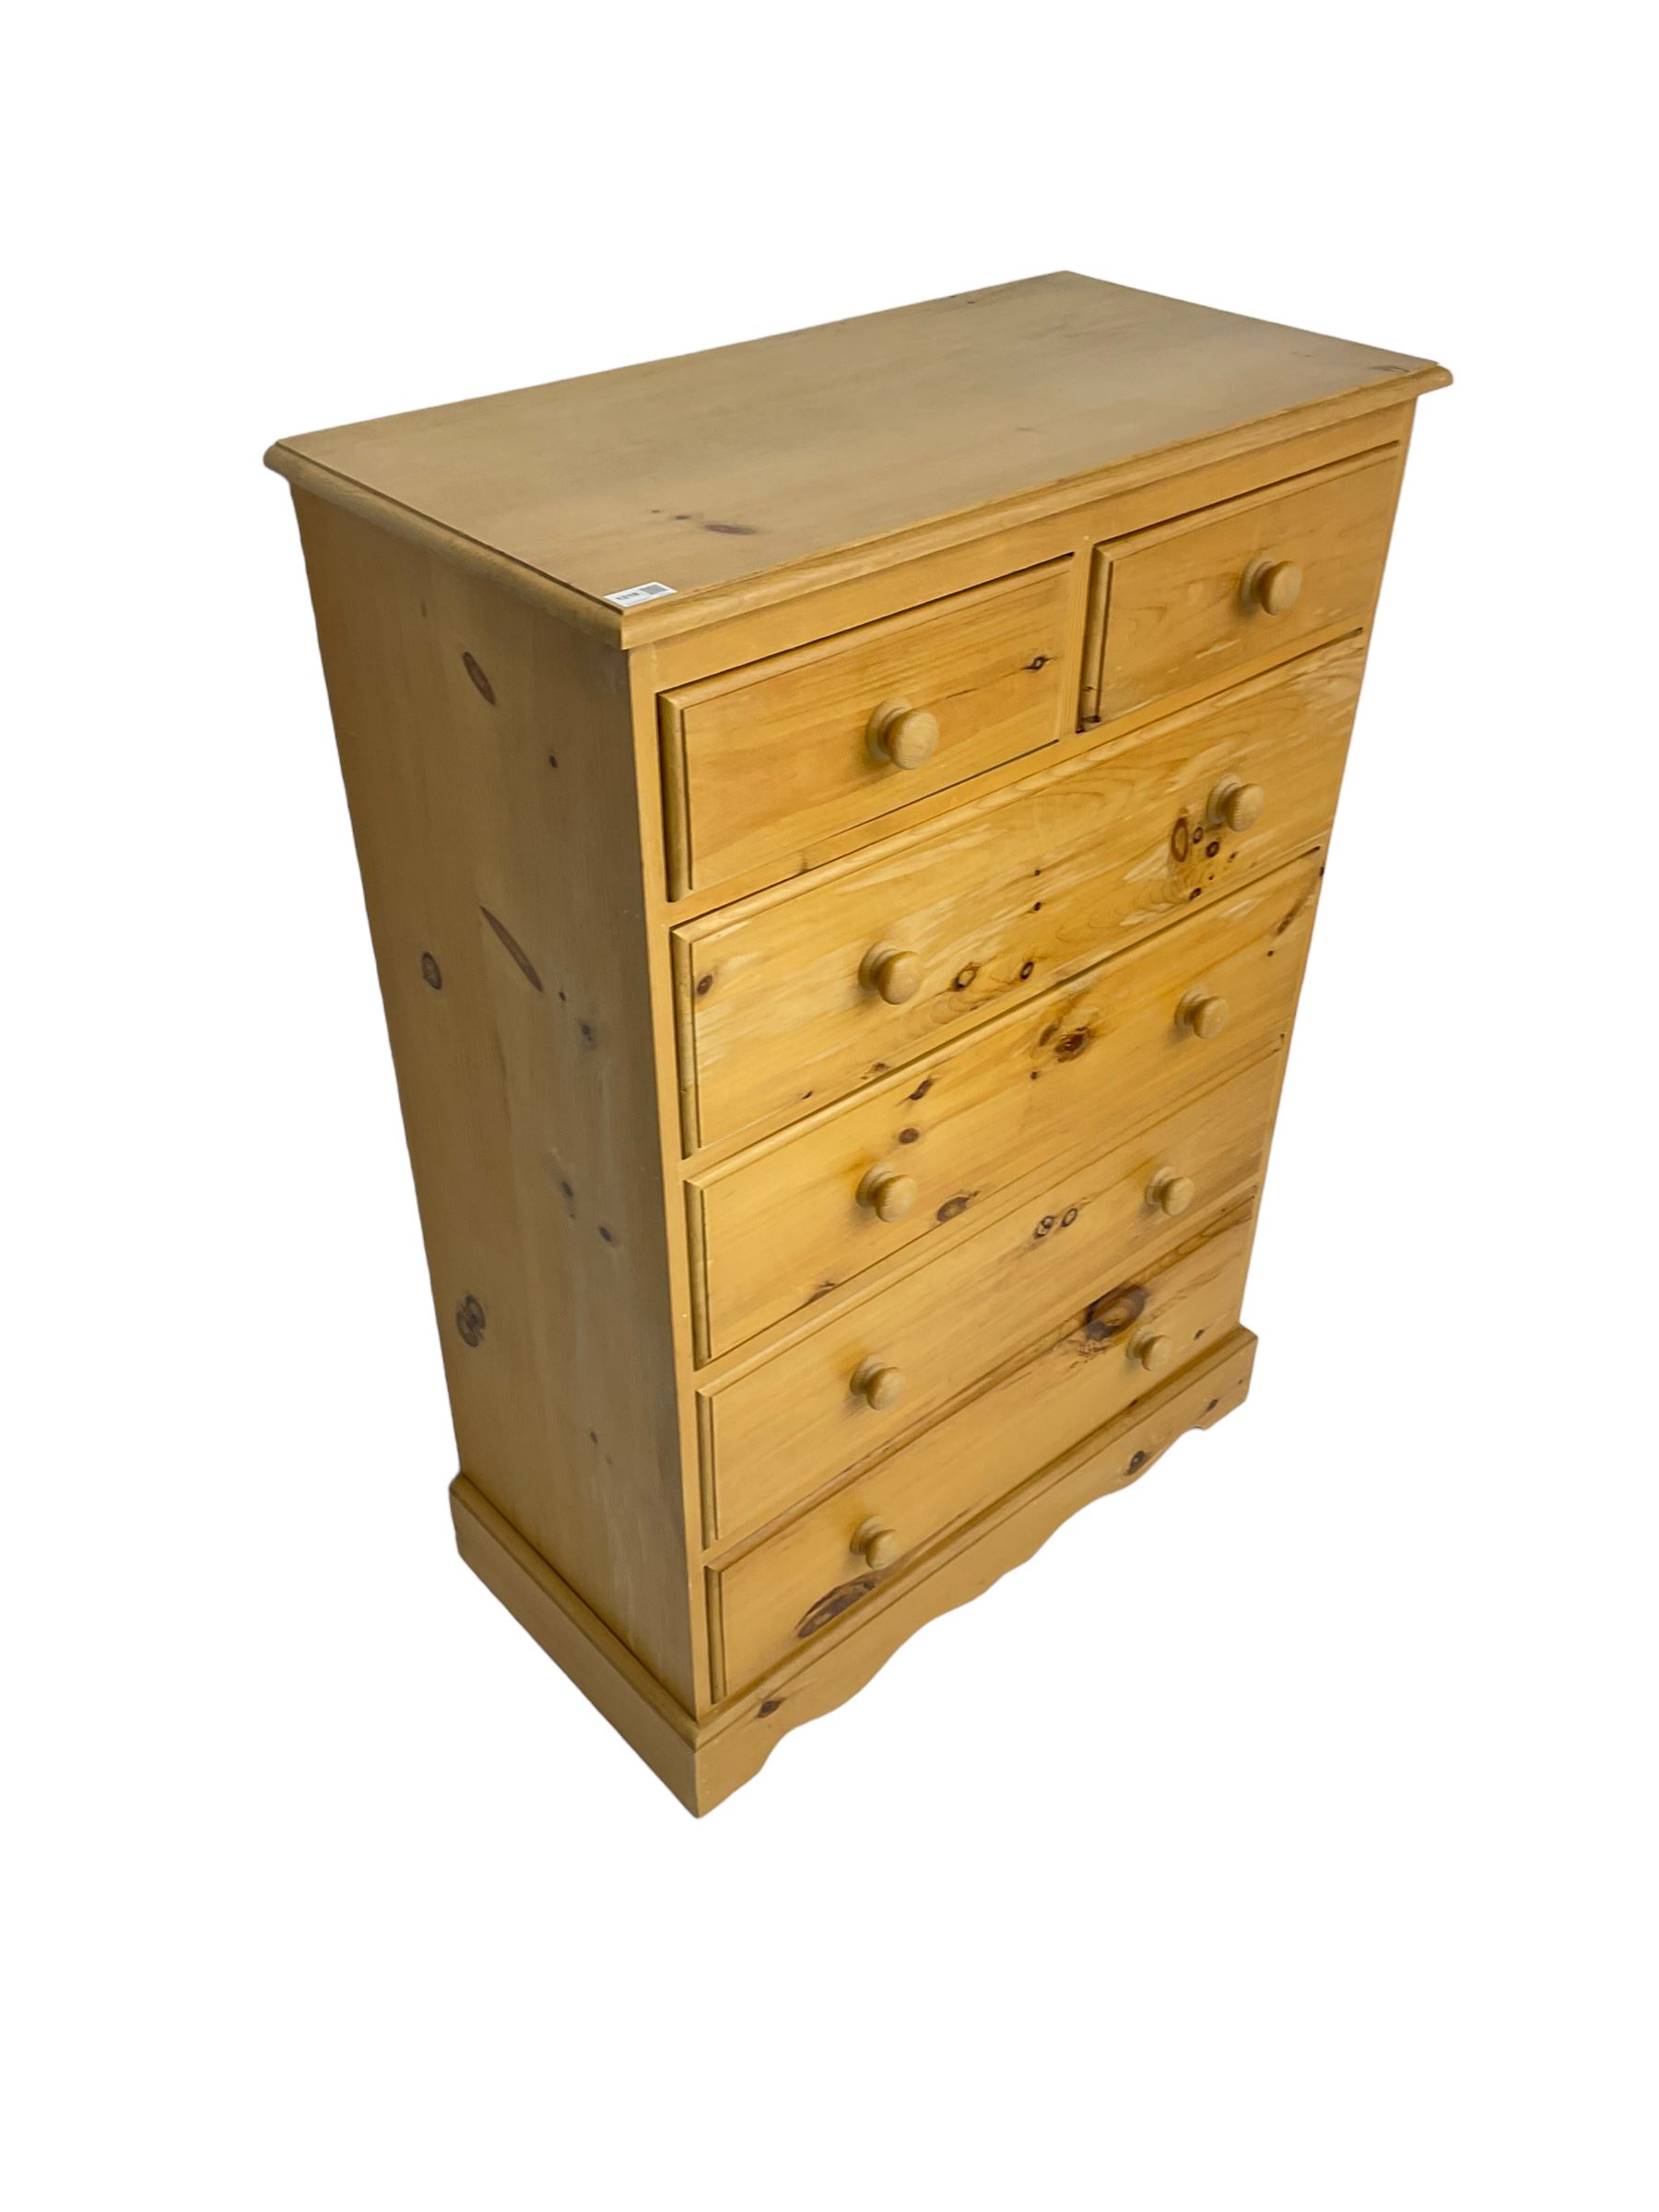 Traditional pine chest - Image 5 of 7